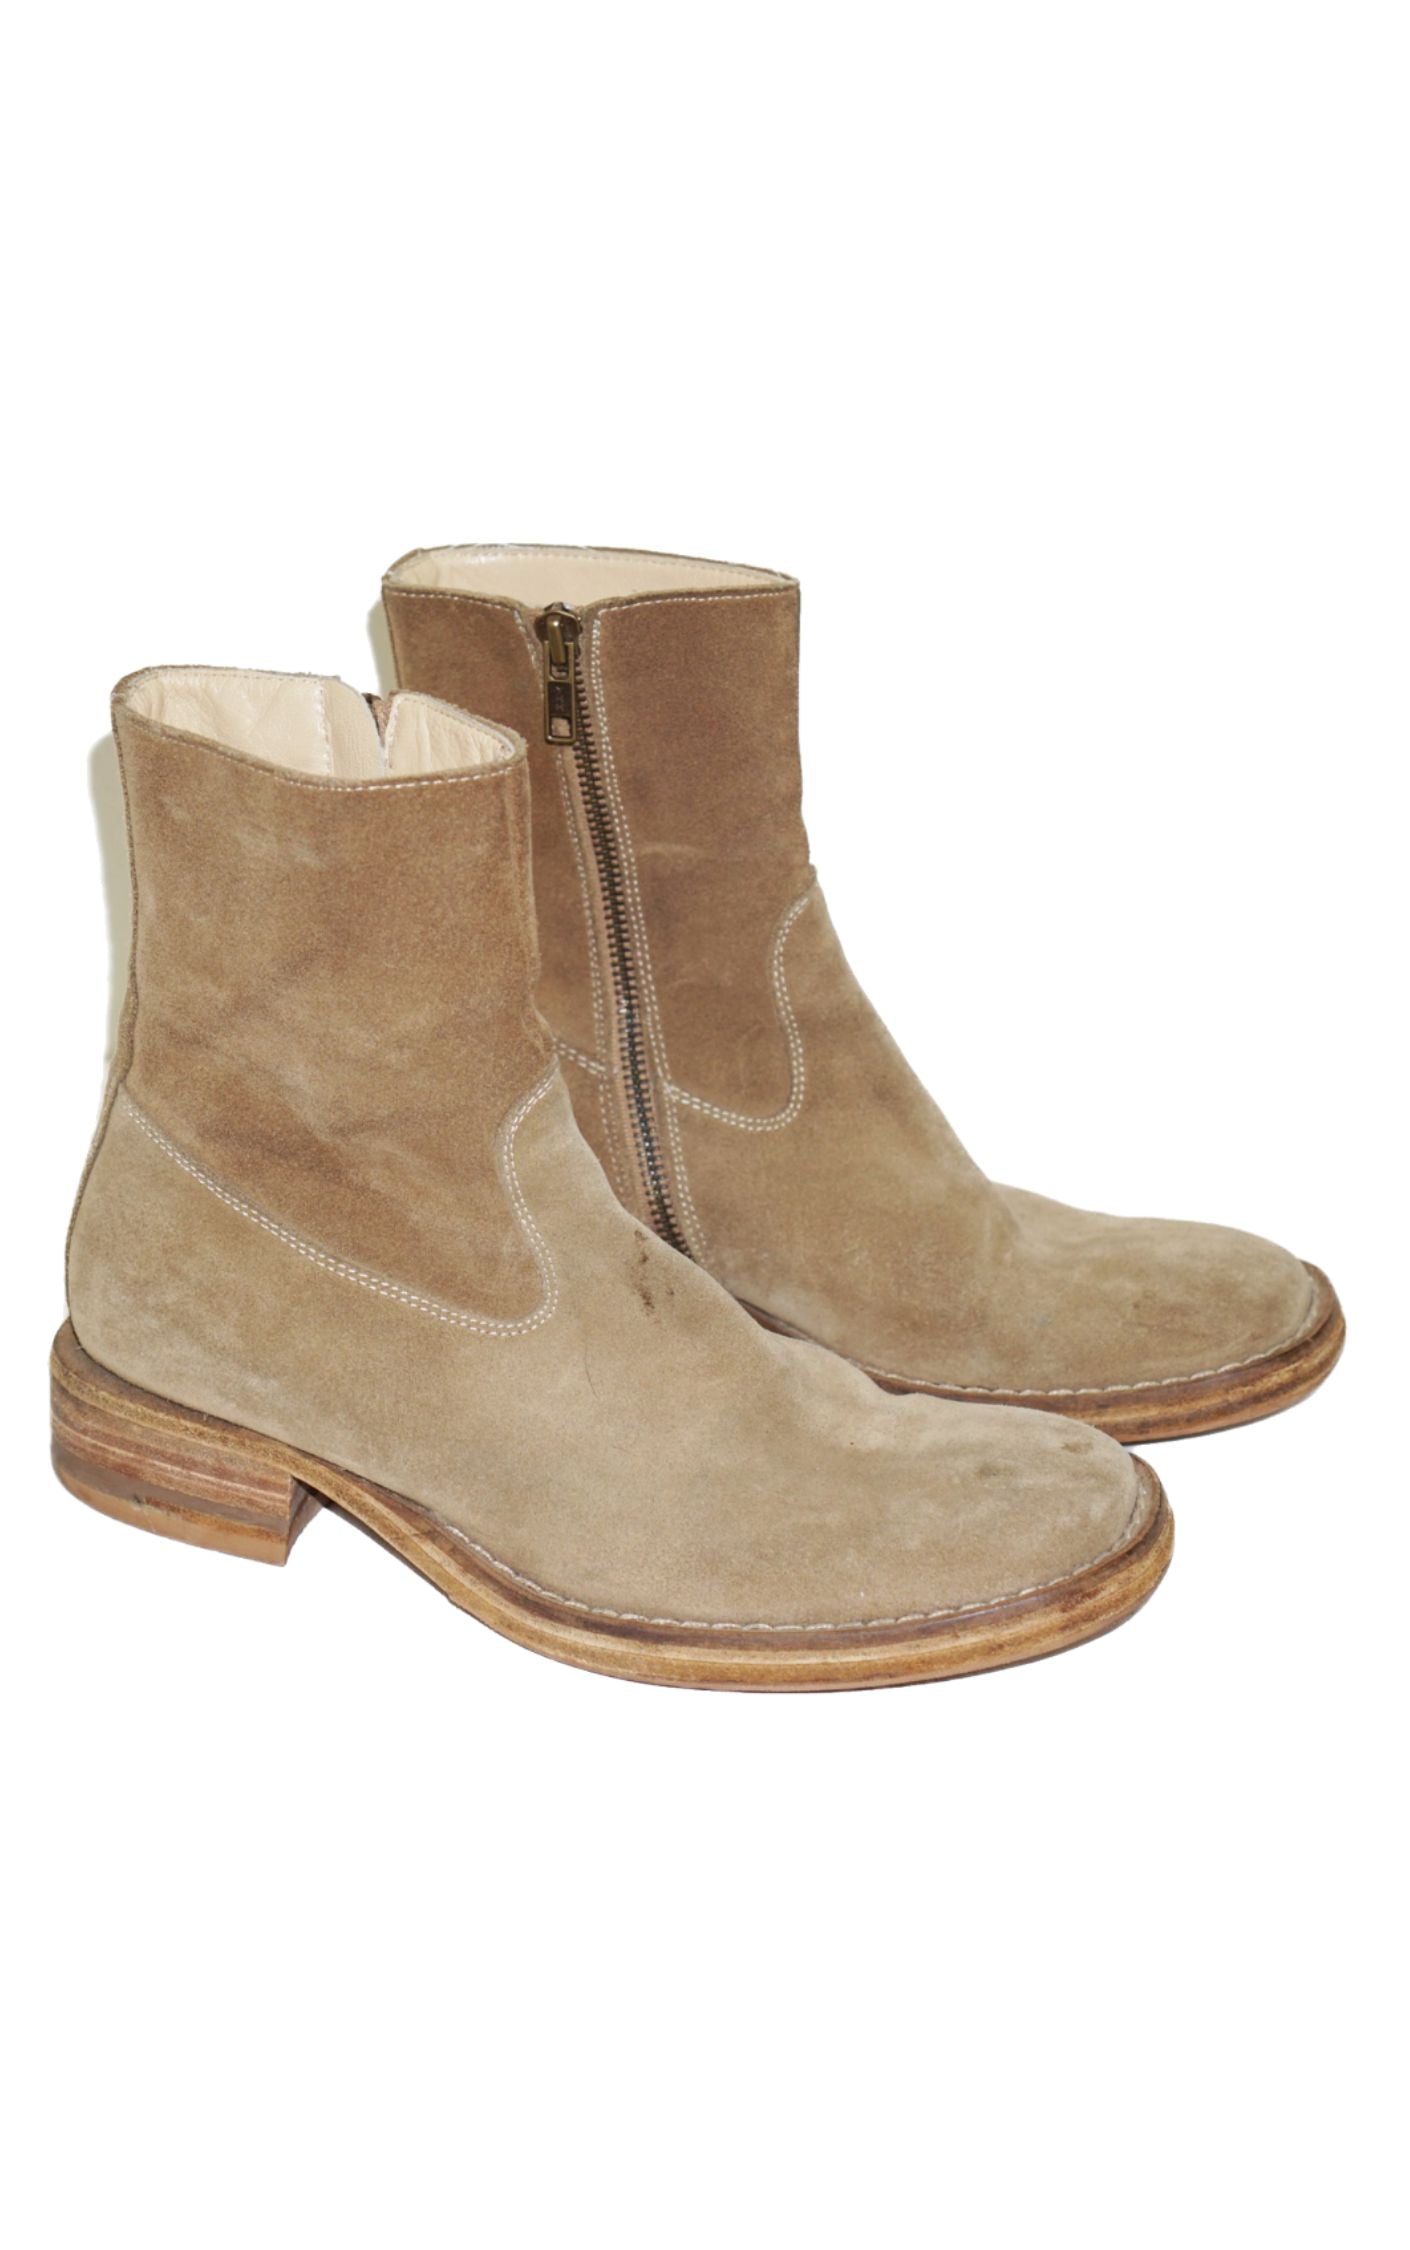 ANN DEMEULEMEESTER Suede Square Toe Boots resellum